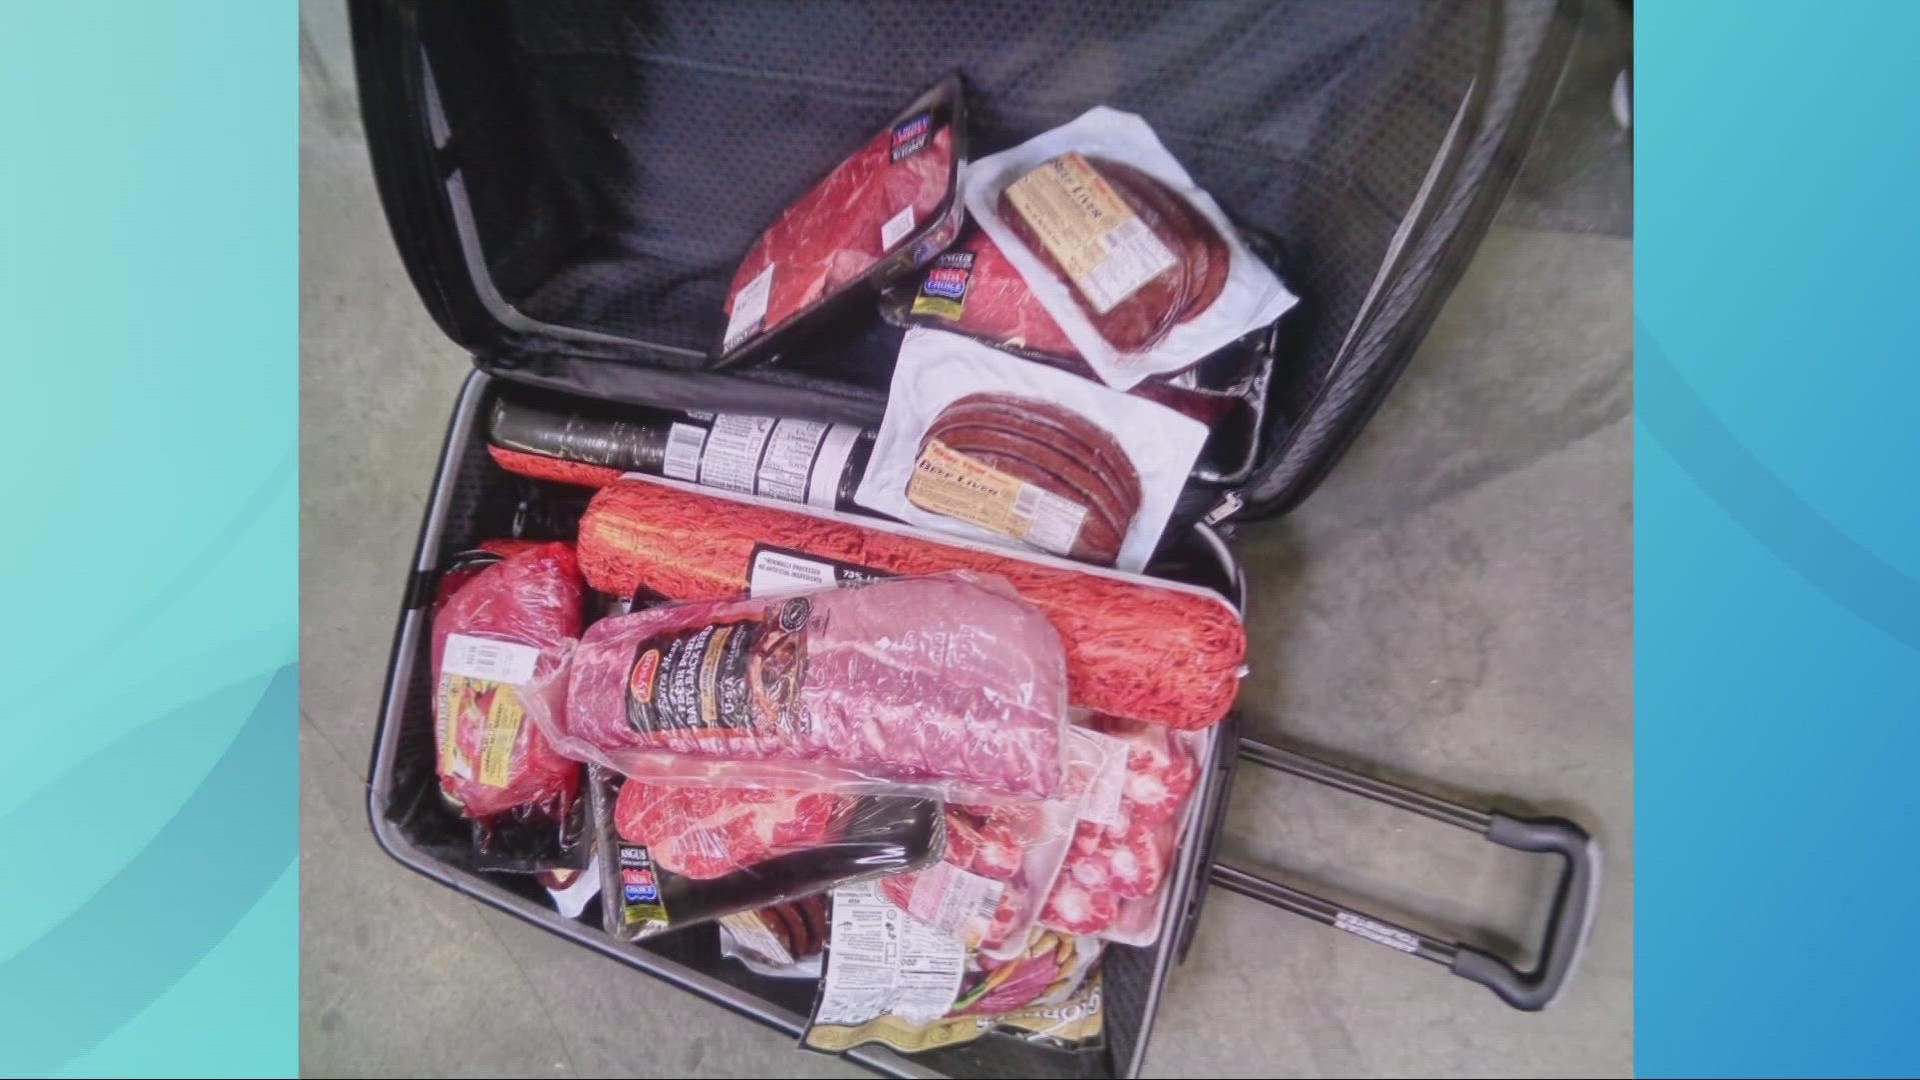 The man was caught trying to flee with several cuts of packaged meats, and told officers he planned to sell them to restaurants at half of normal face value.